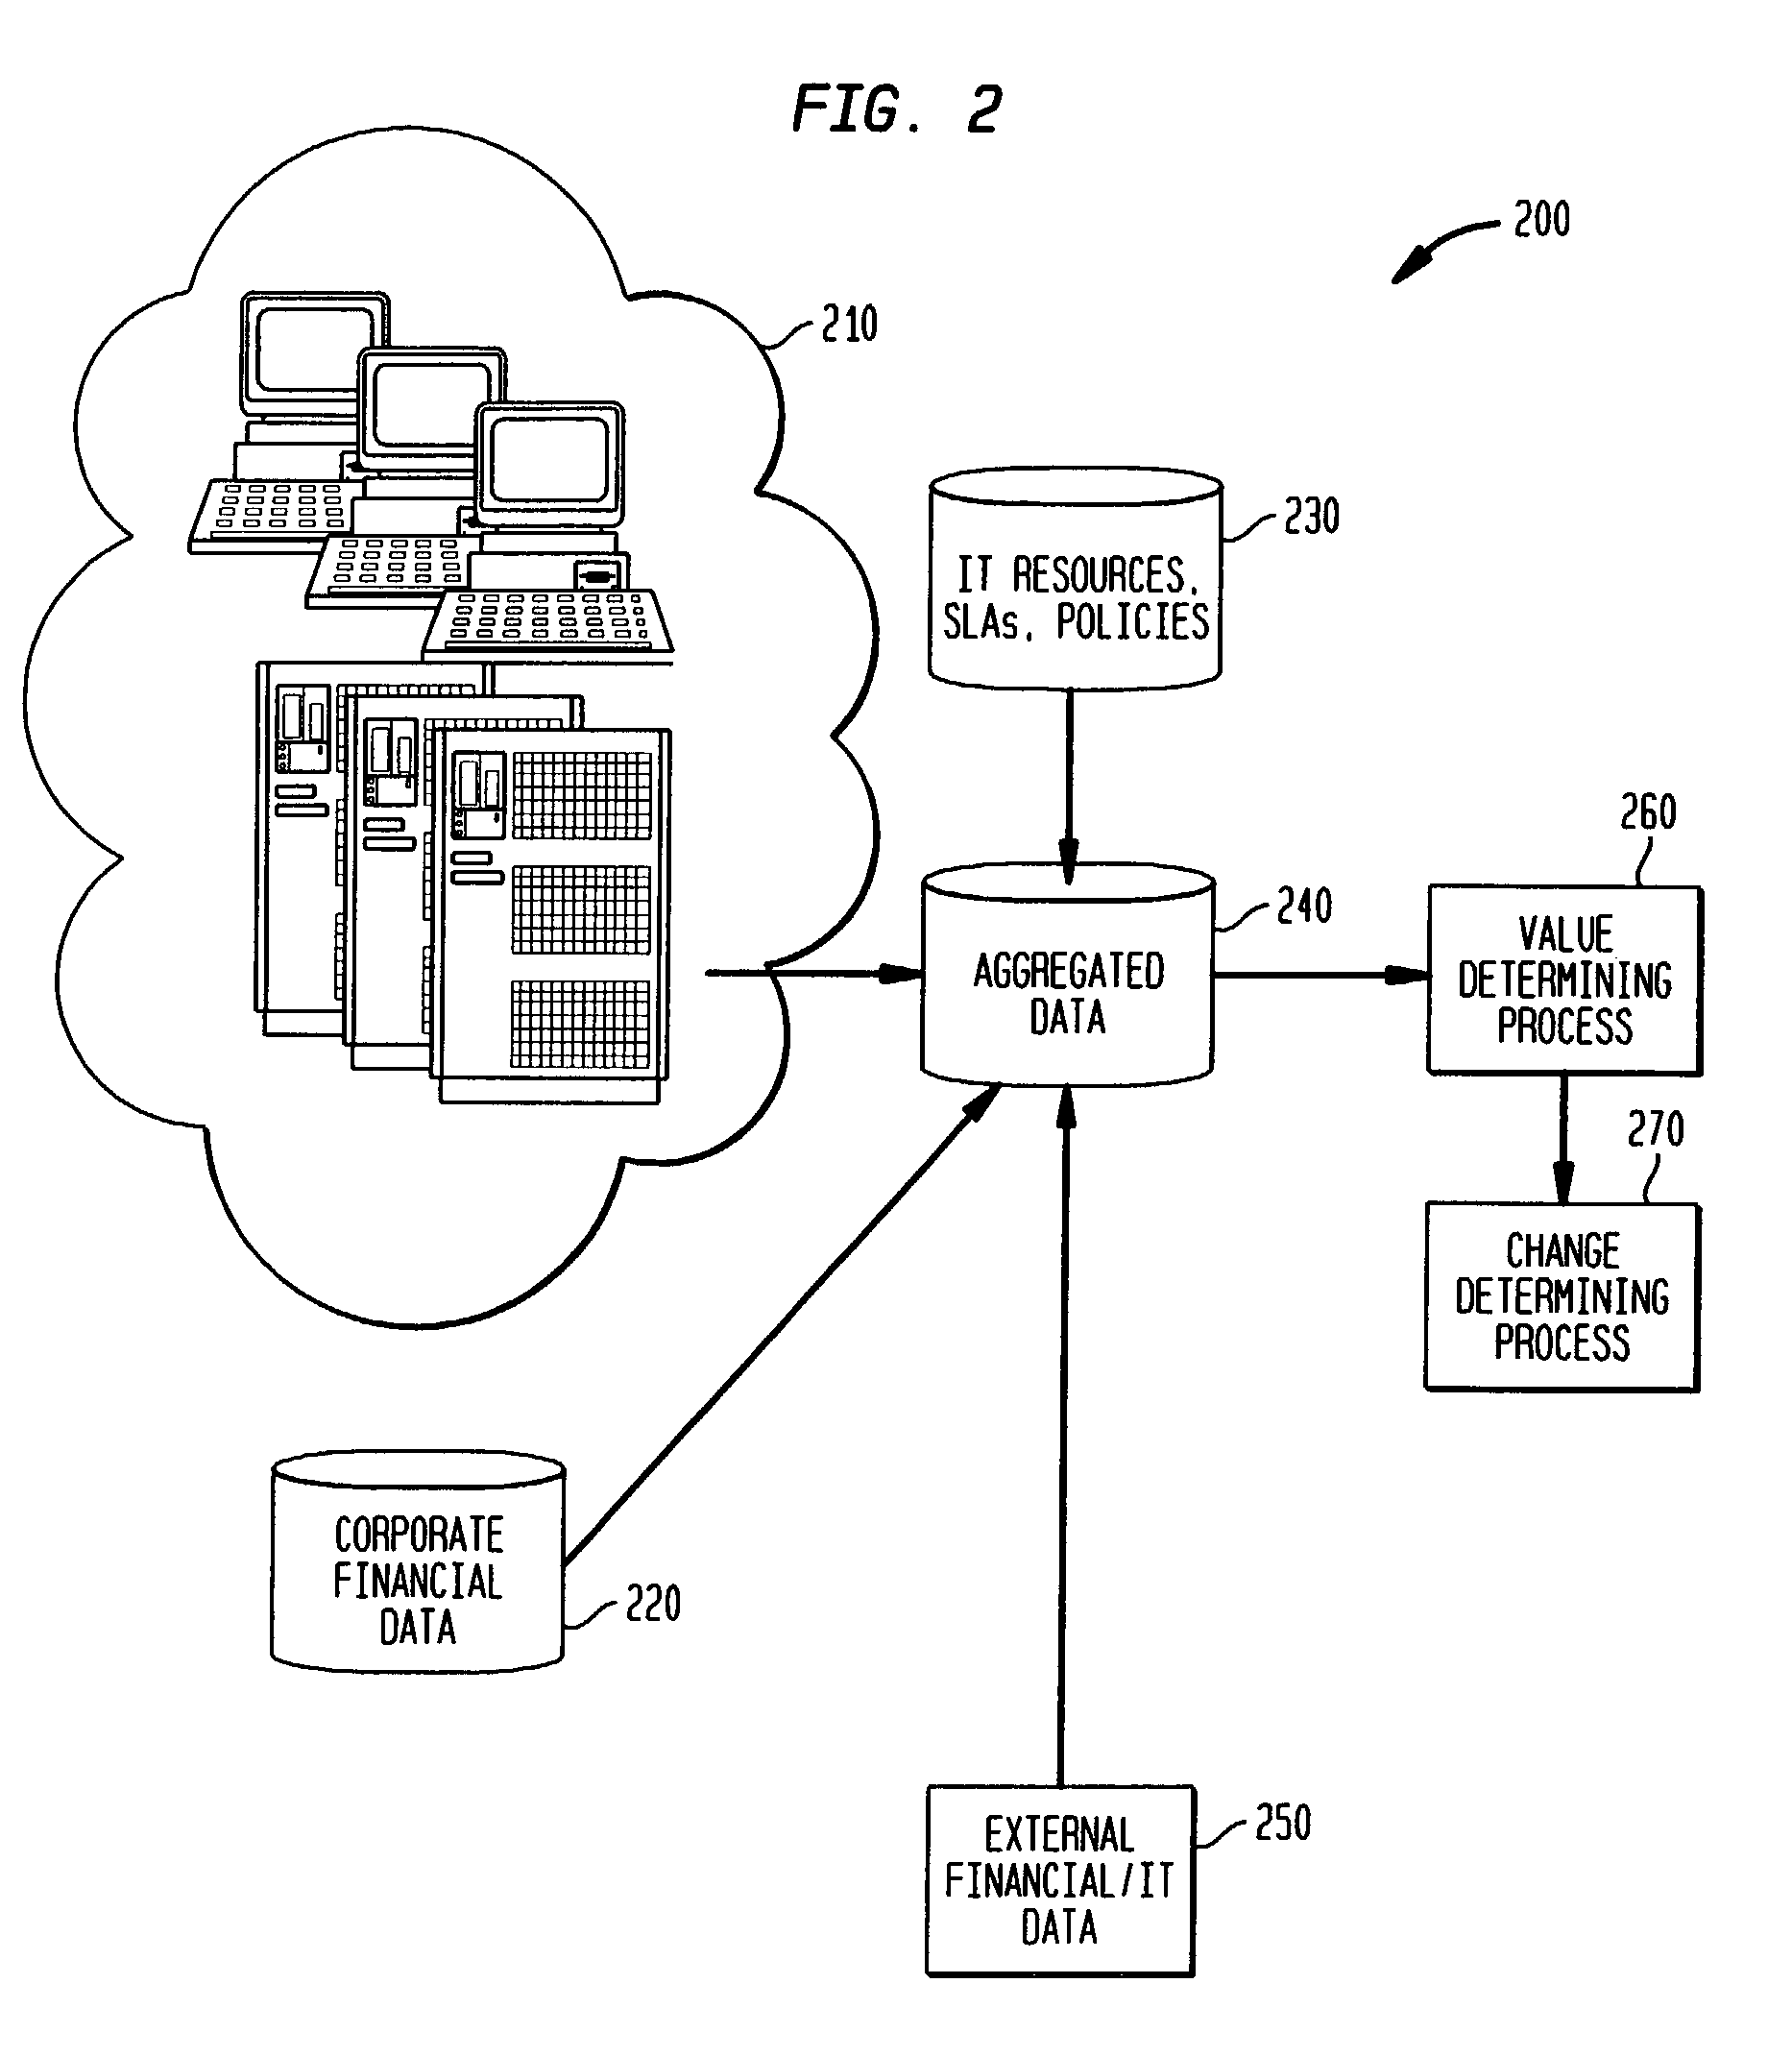 Method and system of configuring elements of a distributed computing system for optimized value